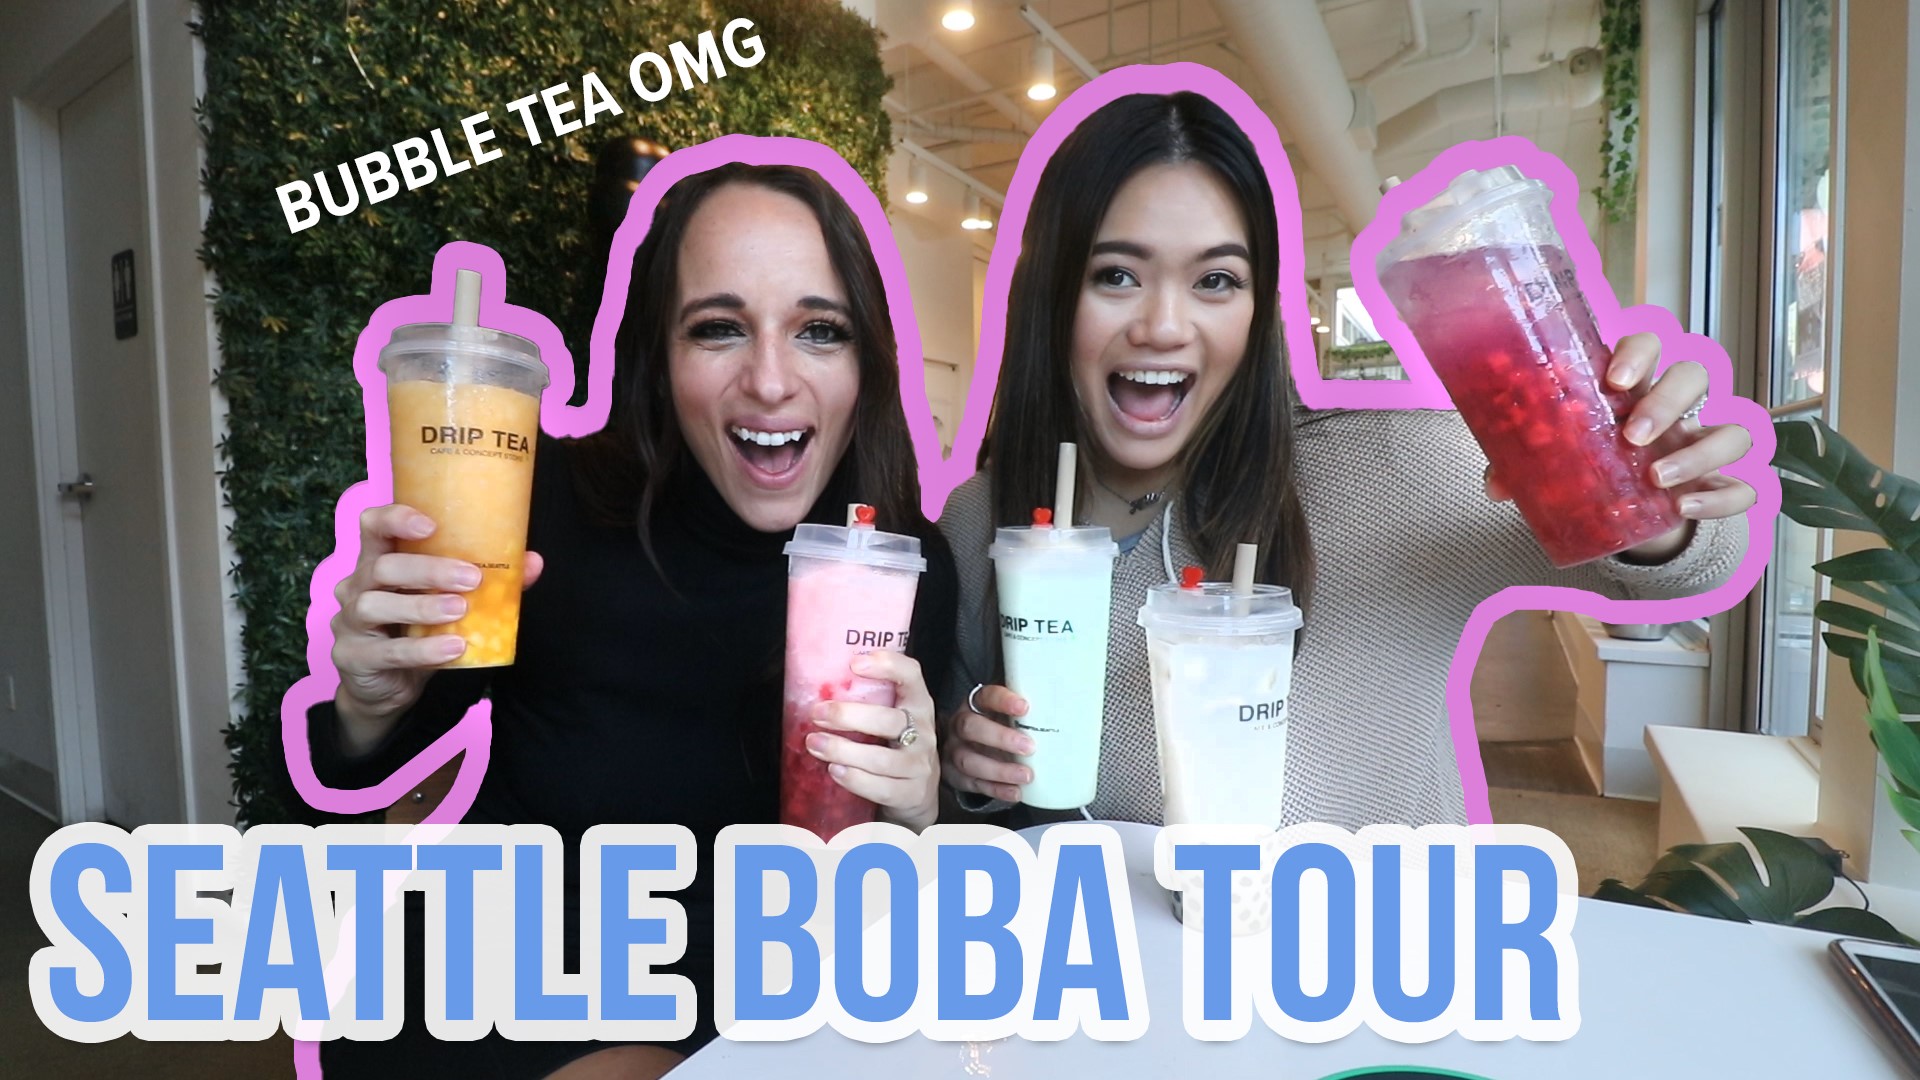 We’re getting our BOBA on! 

I went out for some bubble tea in Seattle in hopes of finding the BEST.